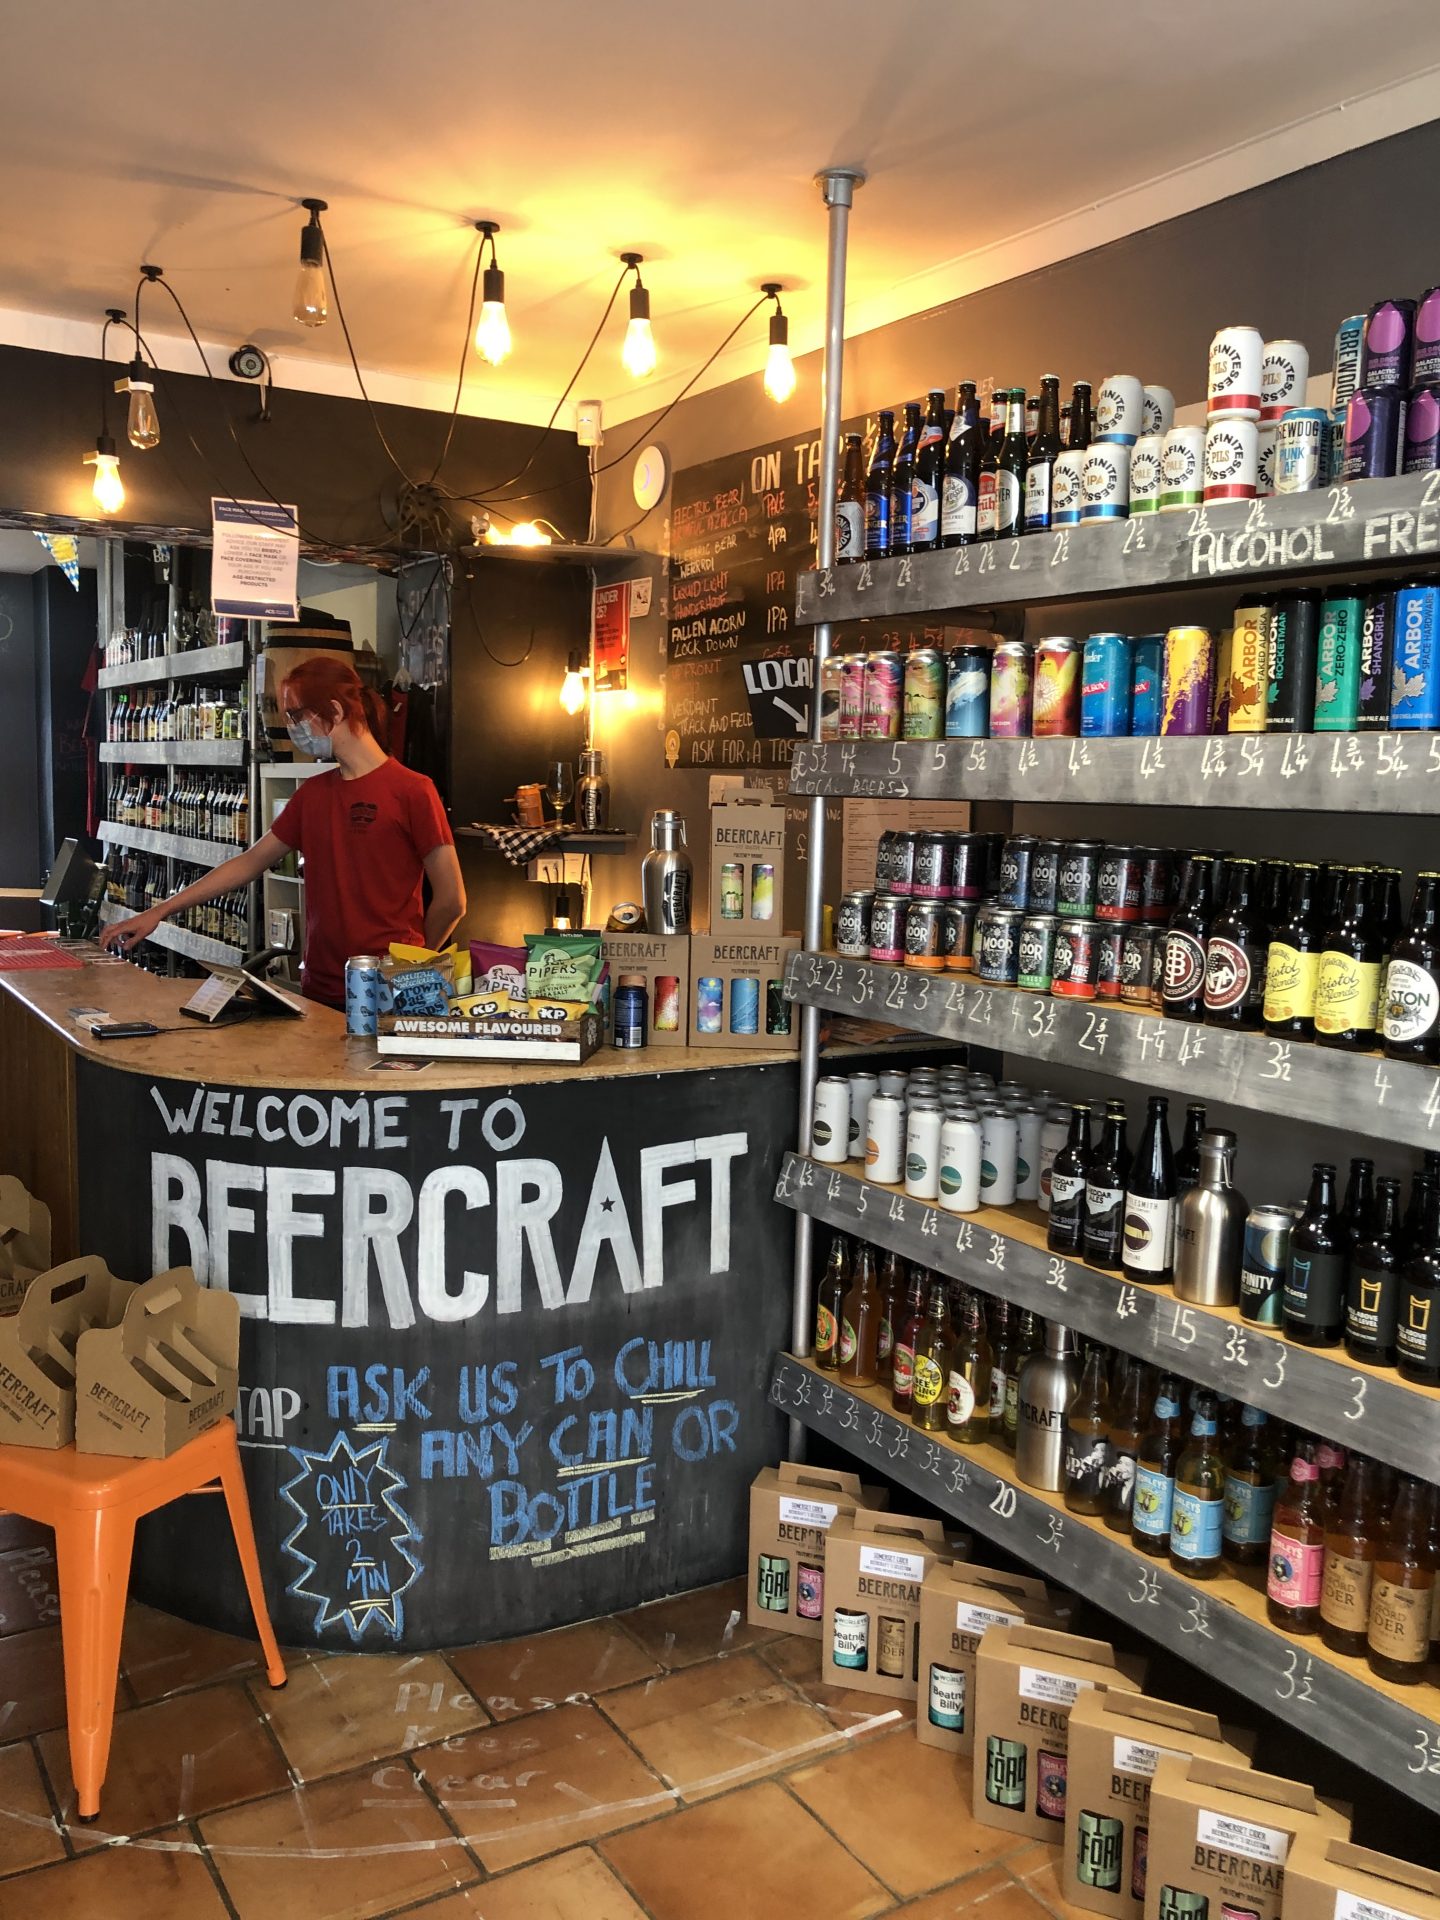 Bath Travel Guide - beer craft 